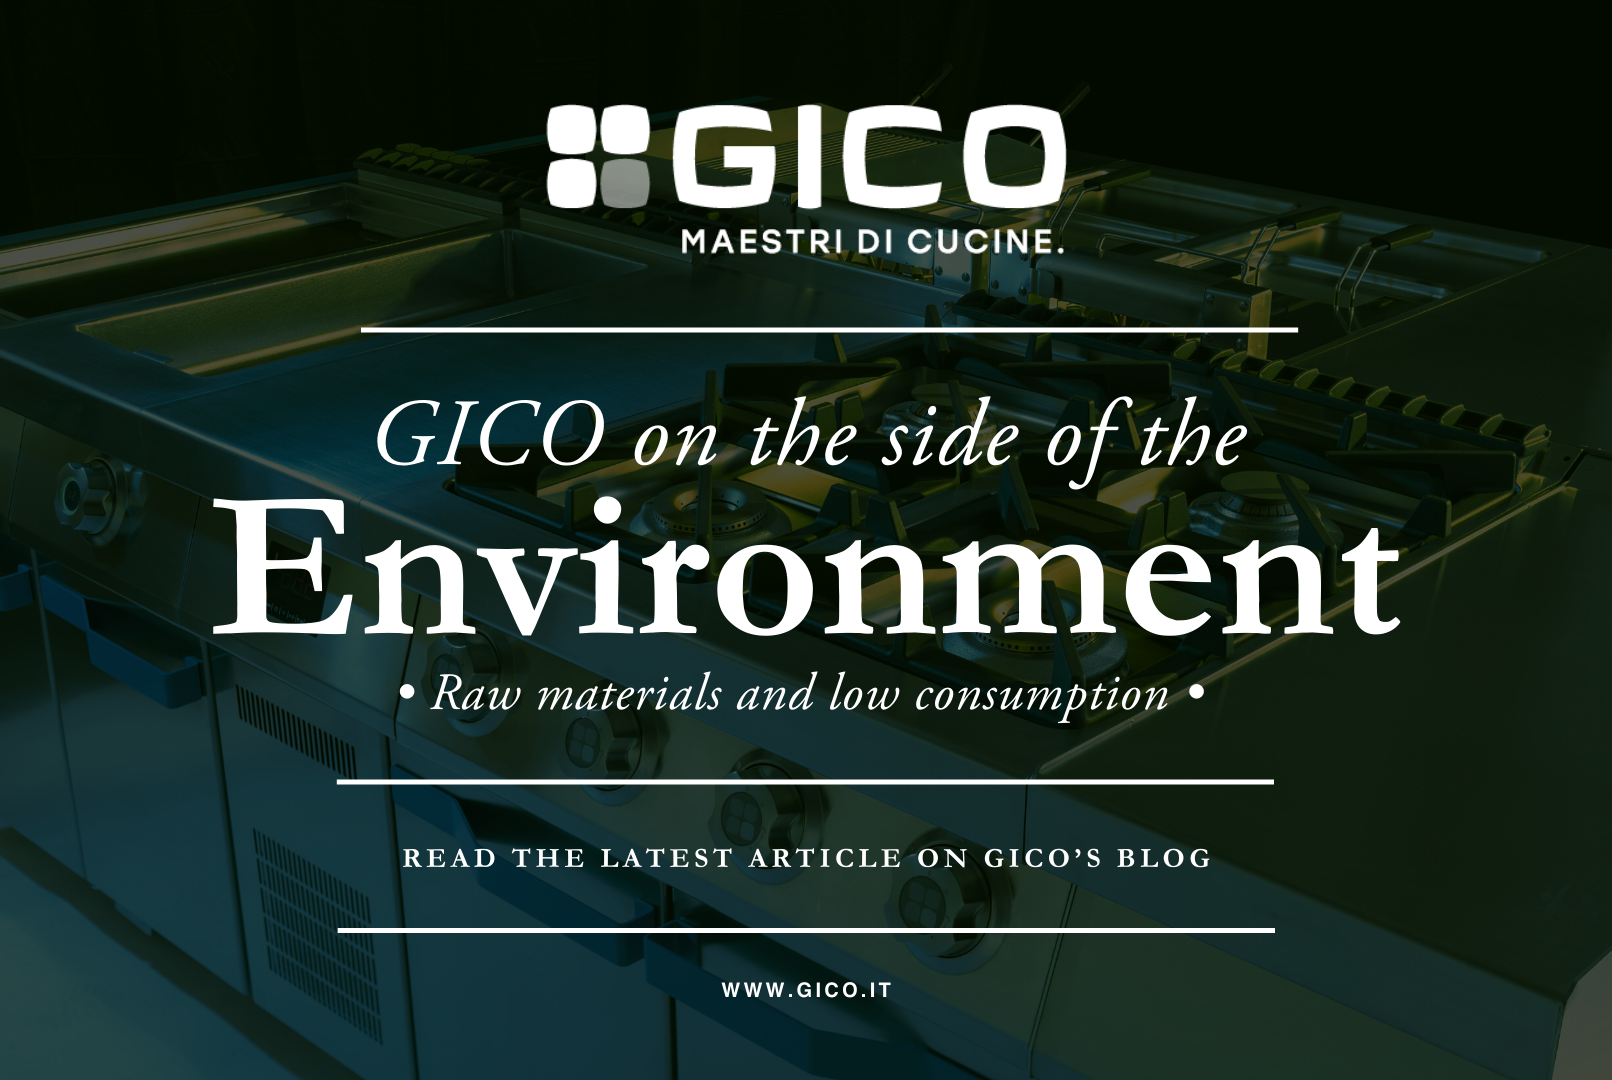 GICO cares about the environment: enhances new raw materials and focuses on keeping consumption low